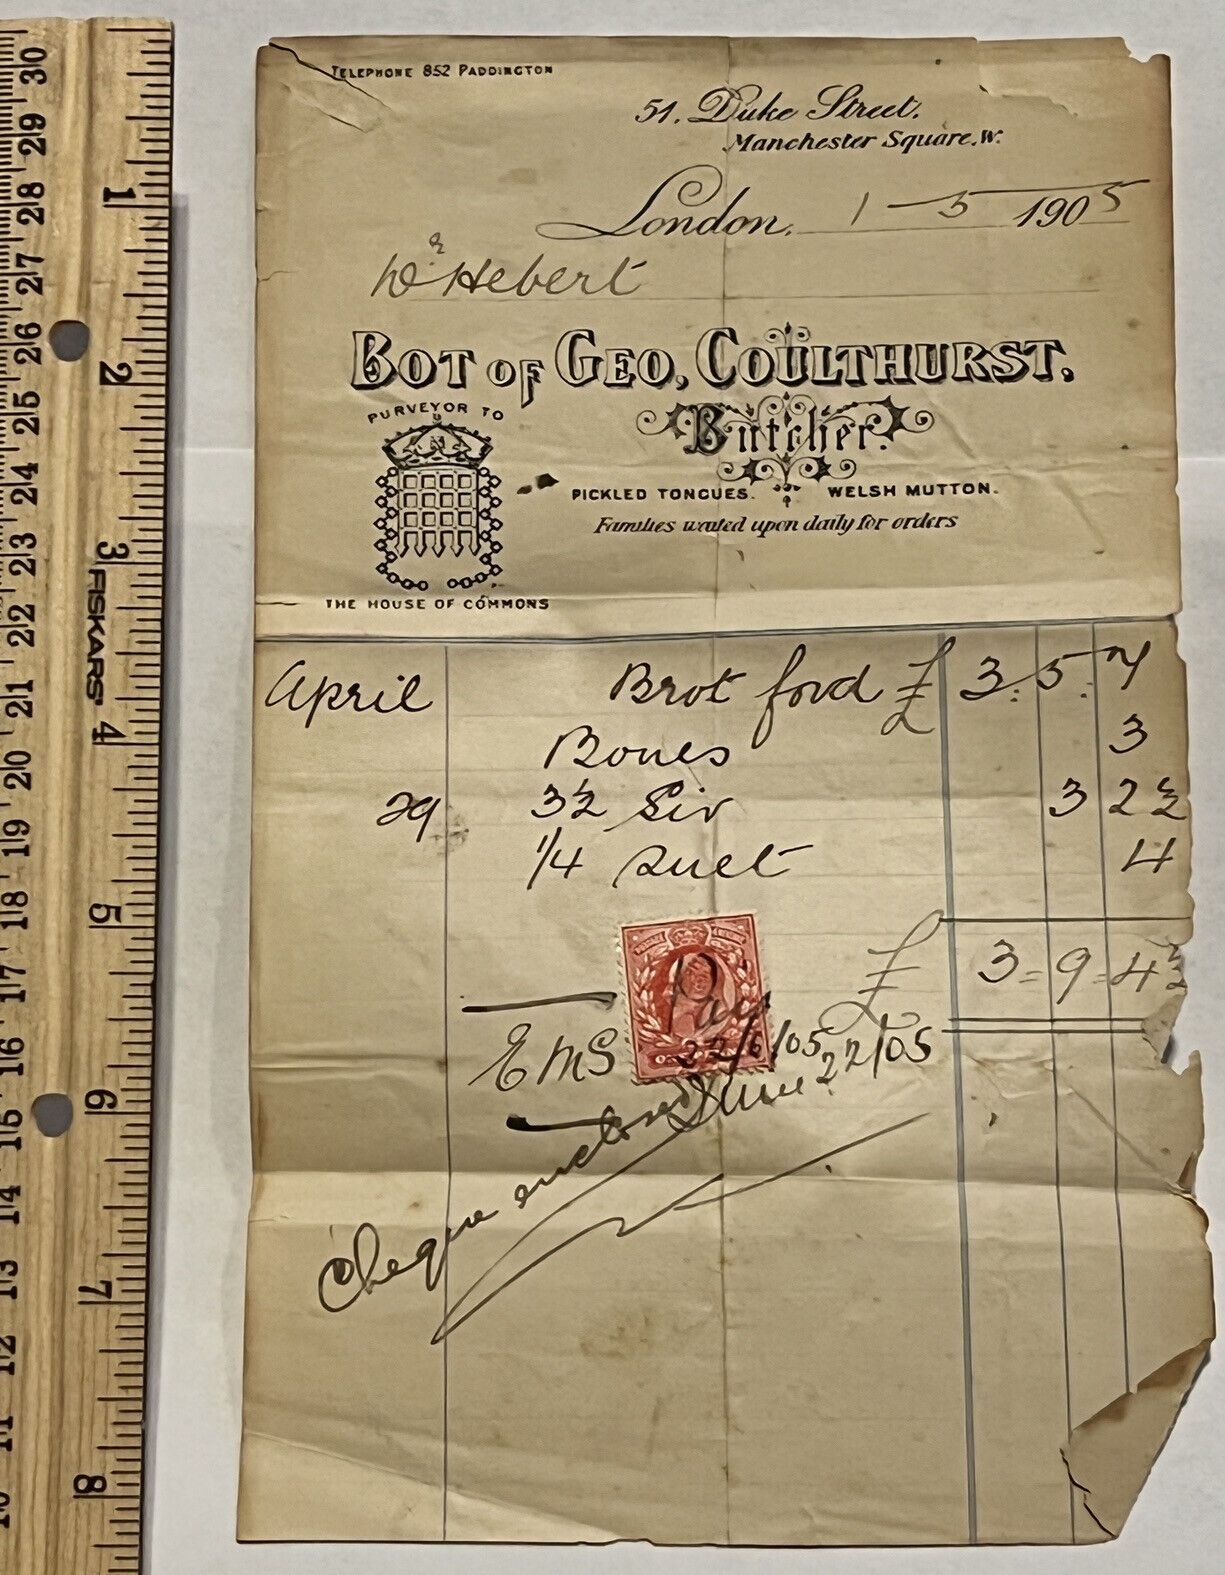 1905 LONDON BOT OF GEO, COULTHURST PICKLED TONGUES RECEIPT, MANCHESTER SQUARE